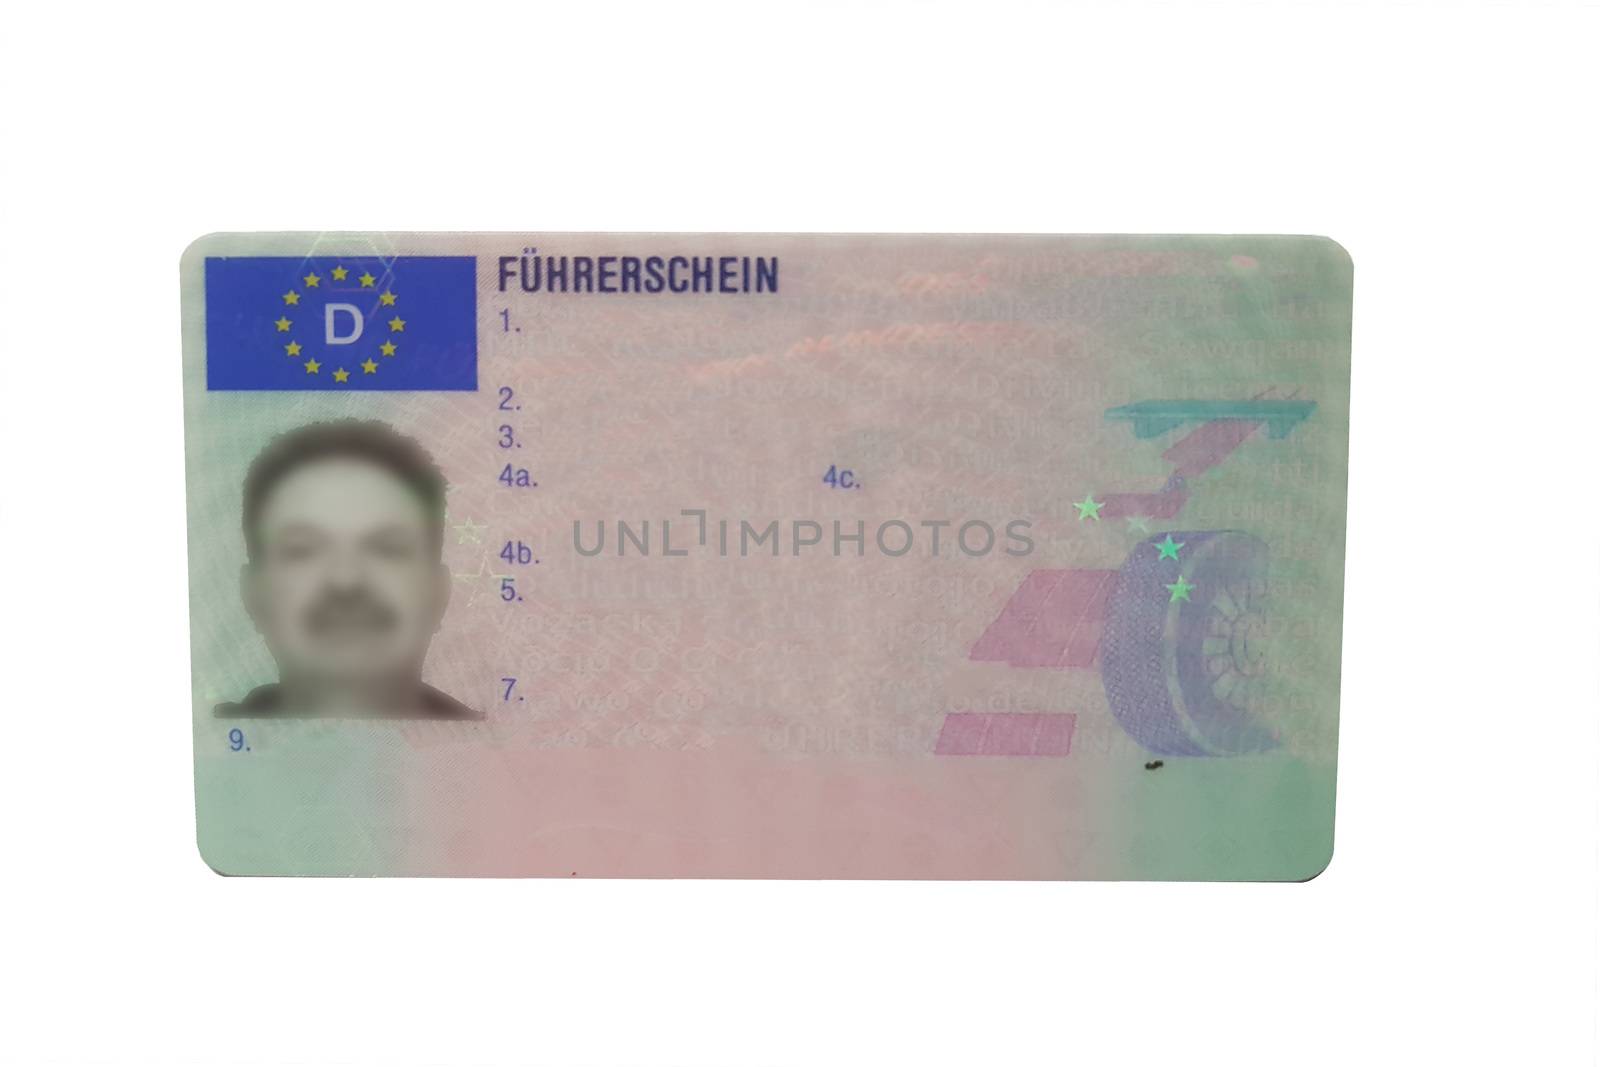 Driving license identity card isolated. Plastic ticket of flat driver license in Germany